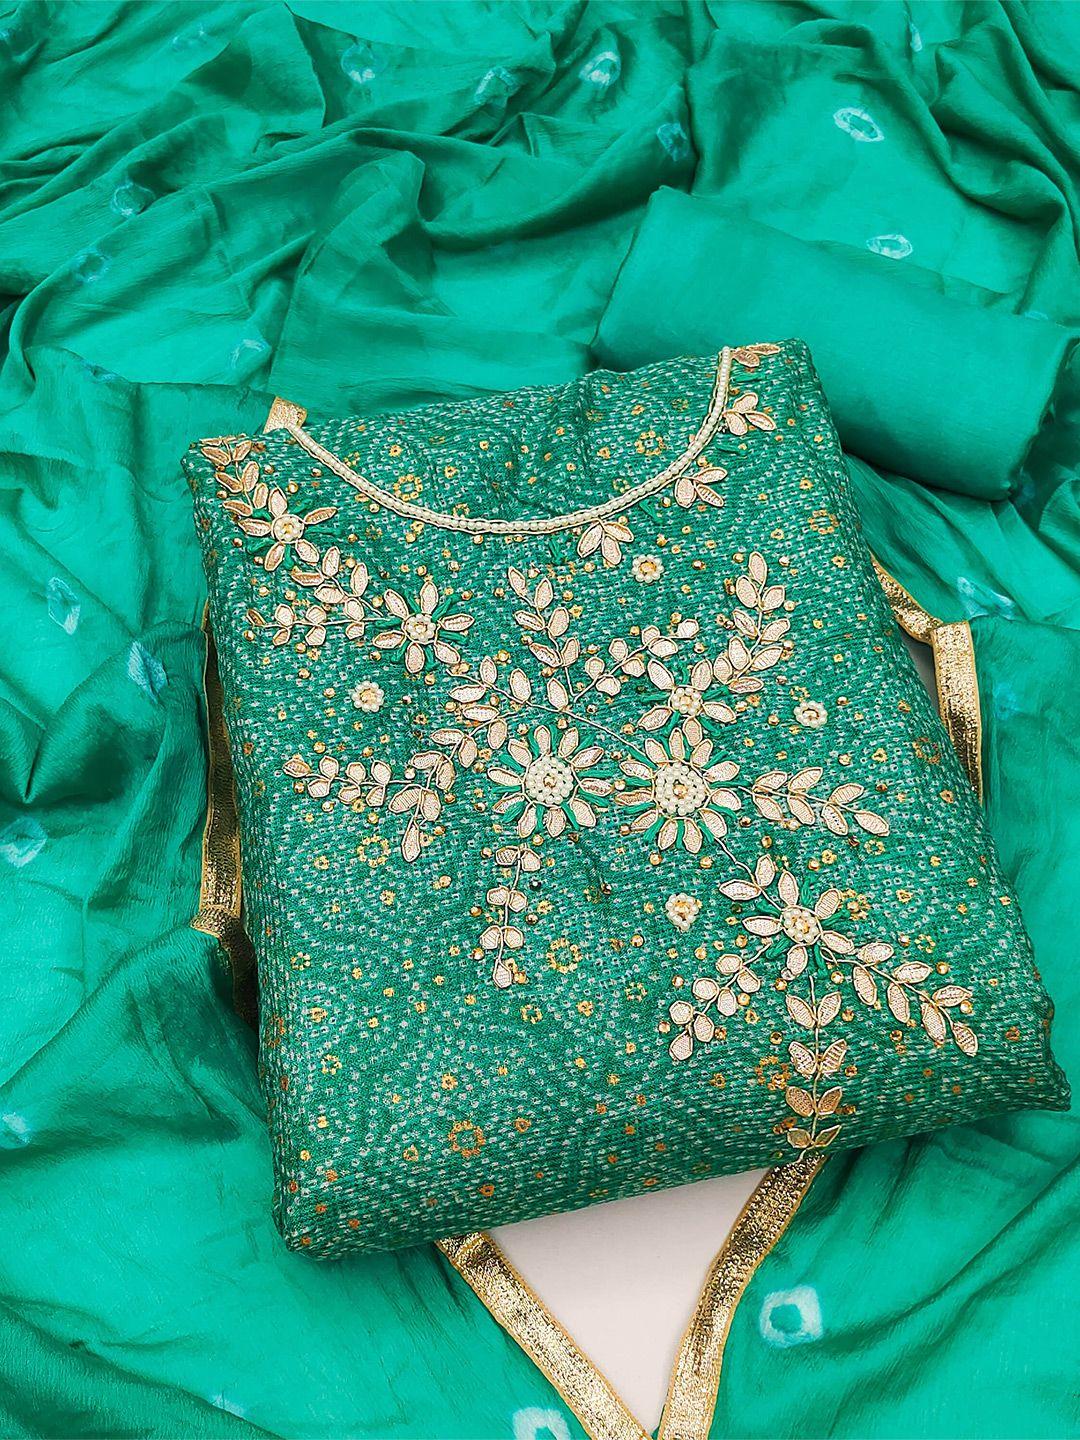 manvaa sea green embellished pure cotton unstitched dress material